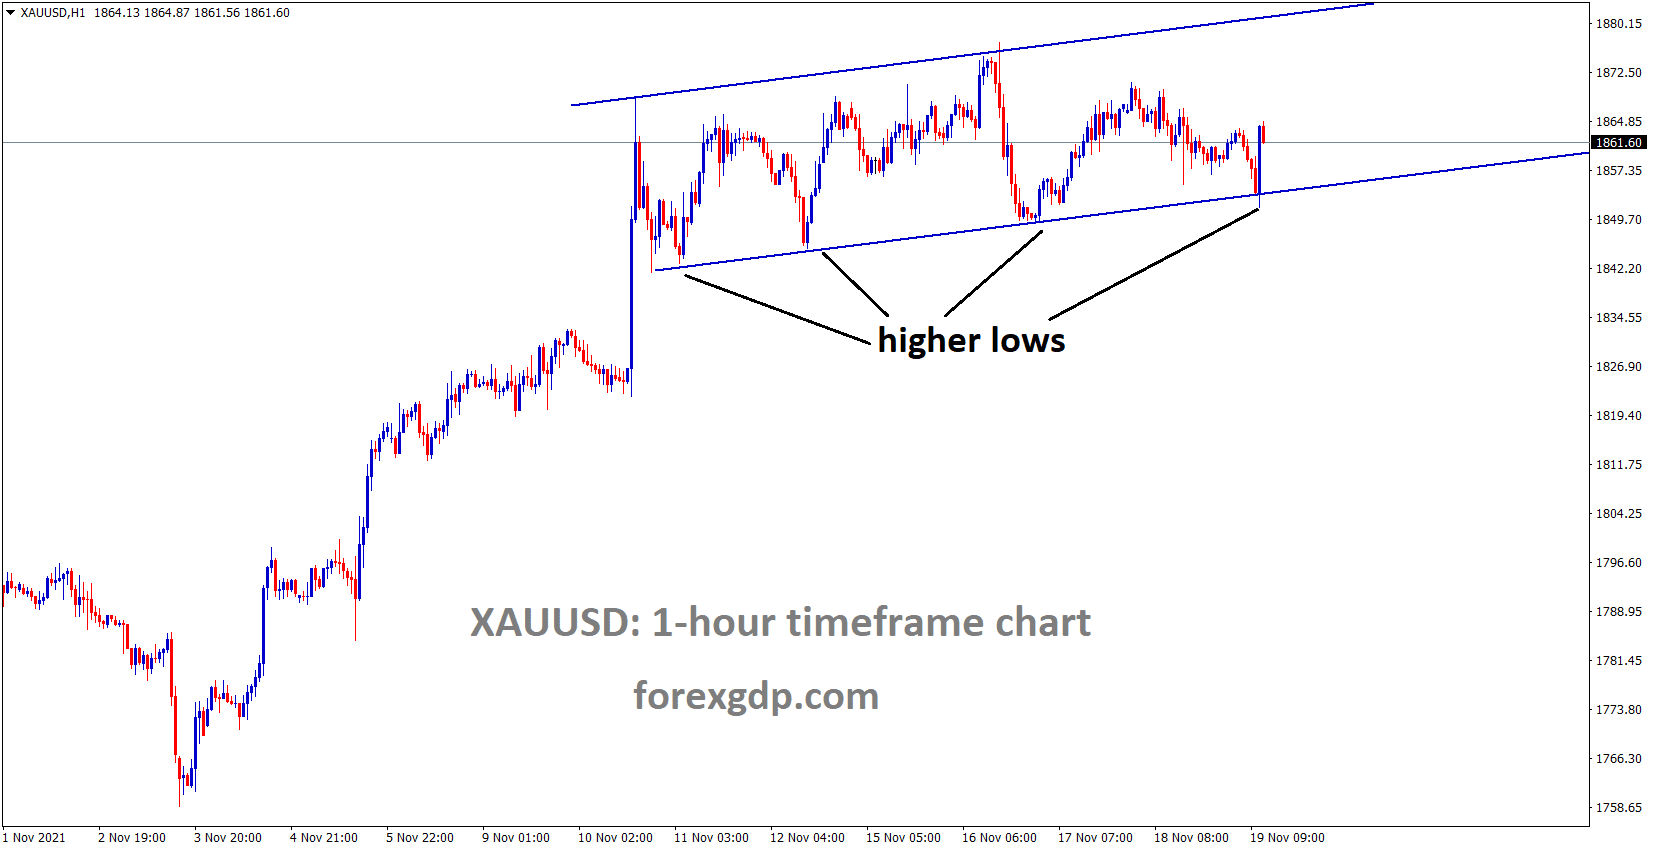 XAUUSD Gold price is moving in an Ascending channel and the market rebounded from the higher low area